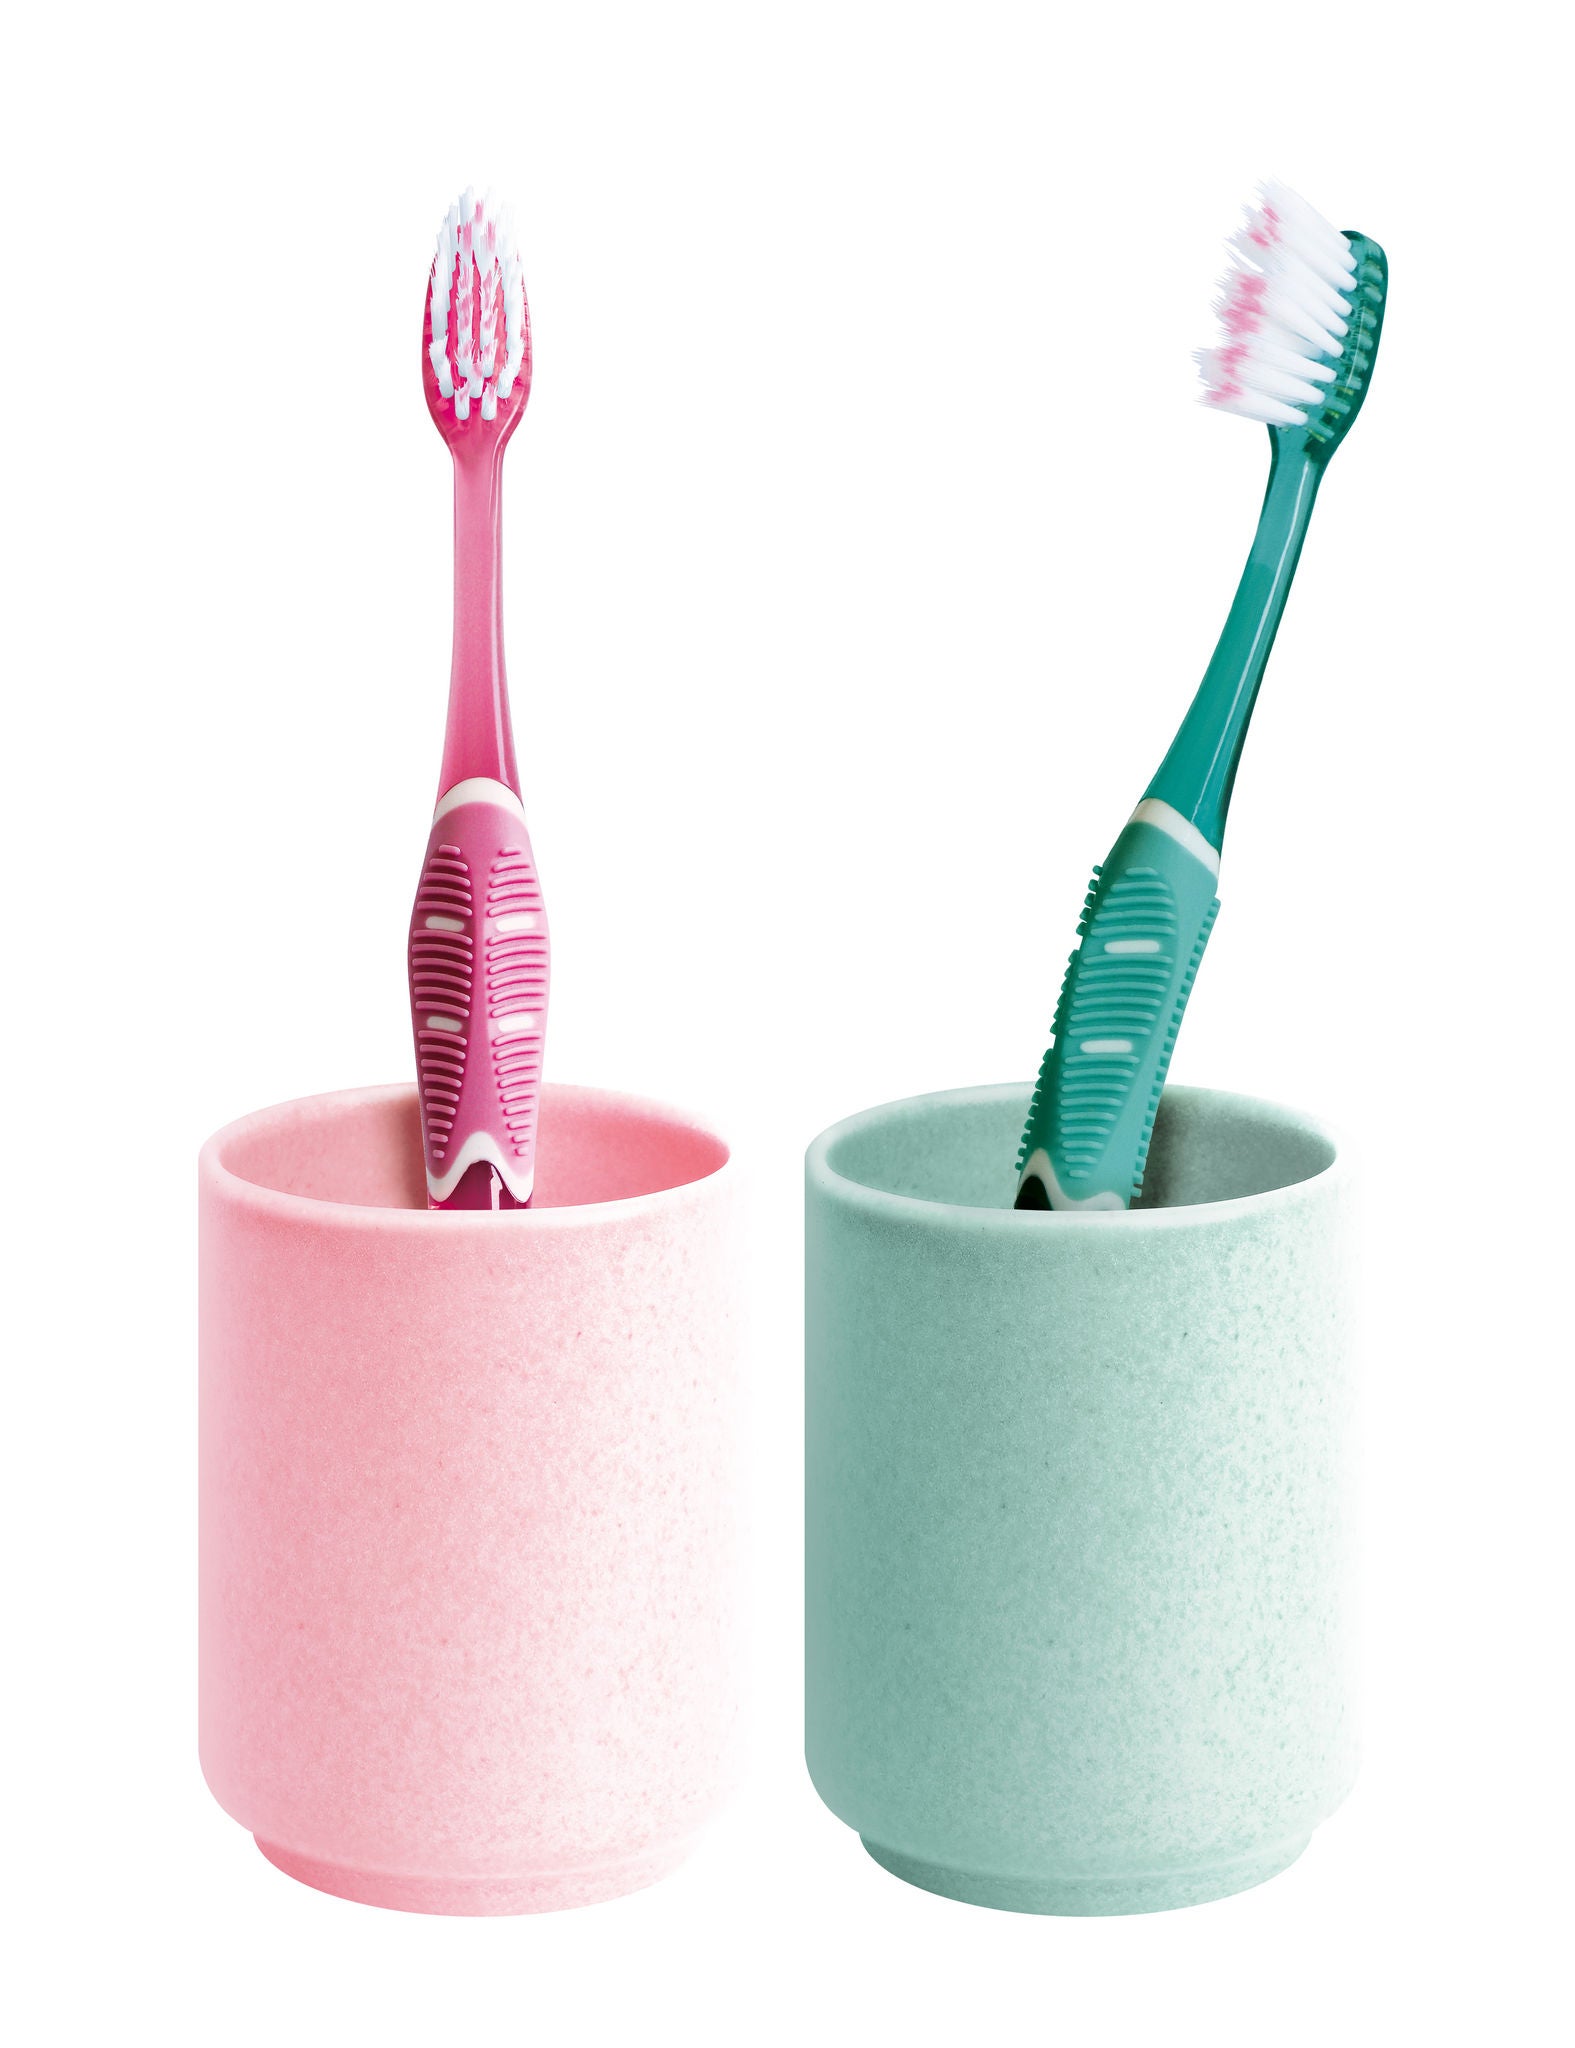 In-context-GUM-PRO-SENSITIVE-2Toothbrushes-into-the-glass-v2